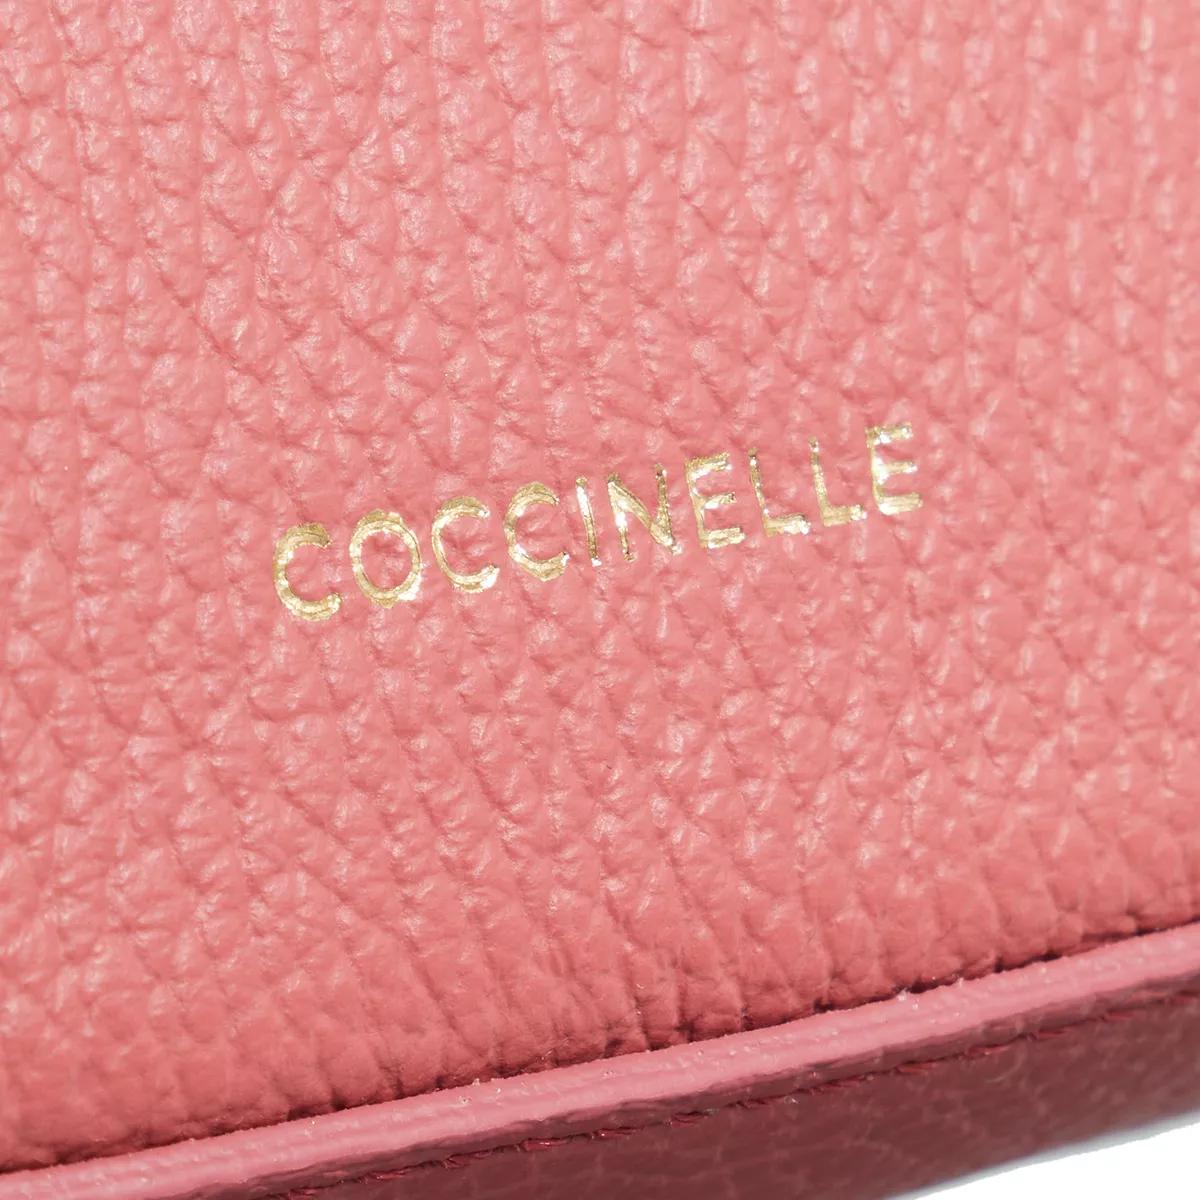 Coccinelle Crossbody bags Tebe in roze